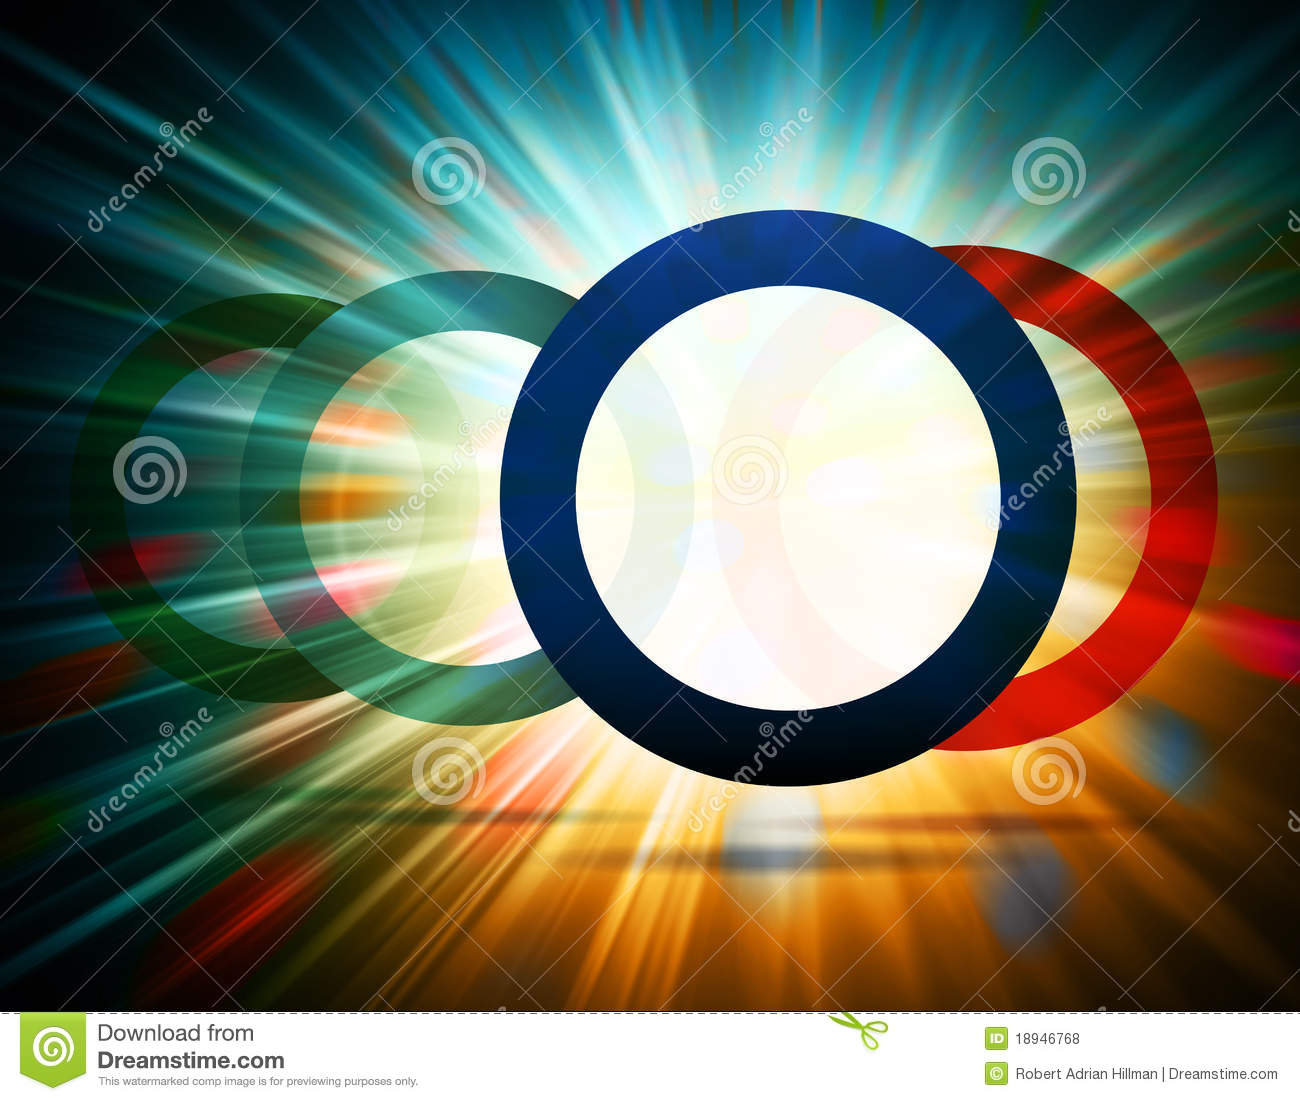 Abstract Background Of A Colorful Burst Of Light Through Circles